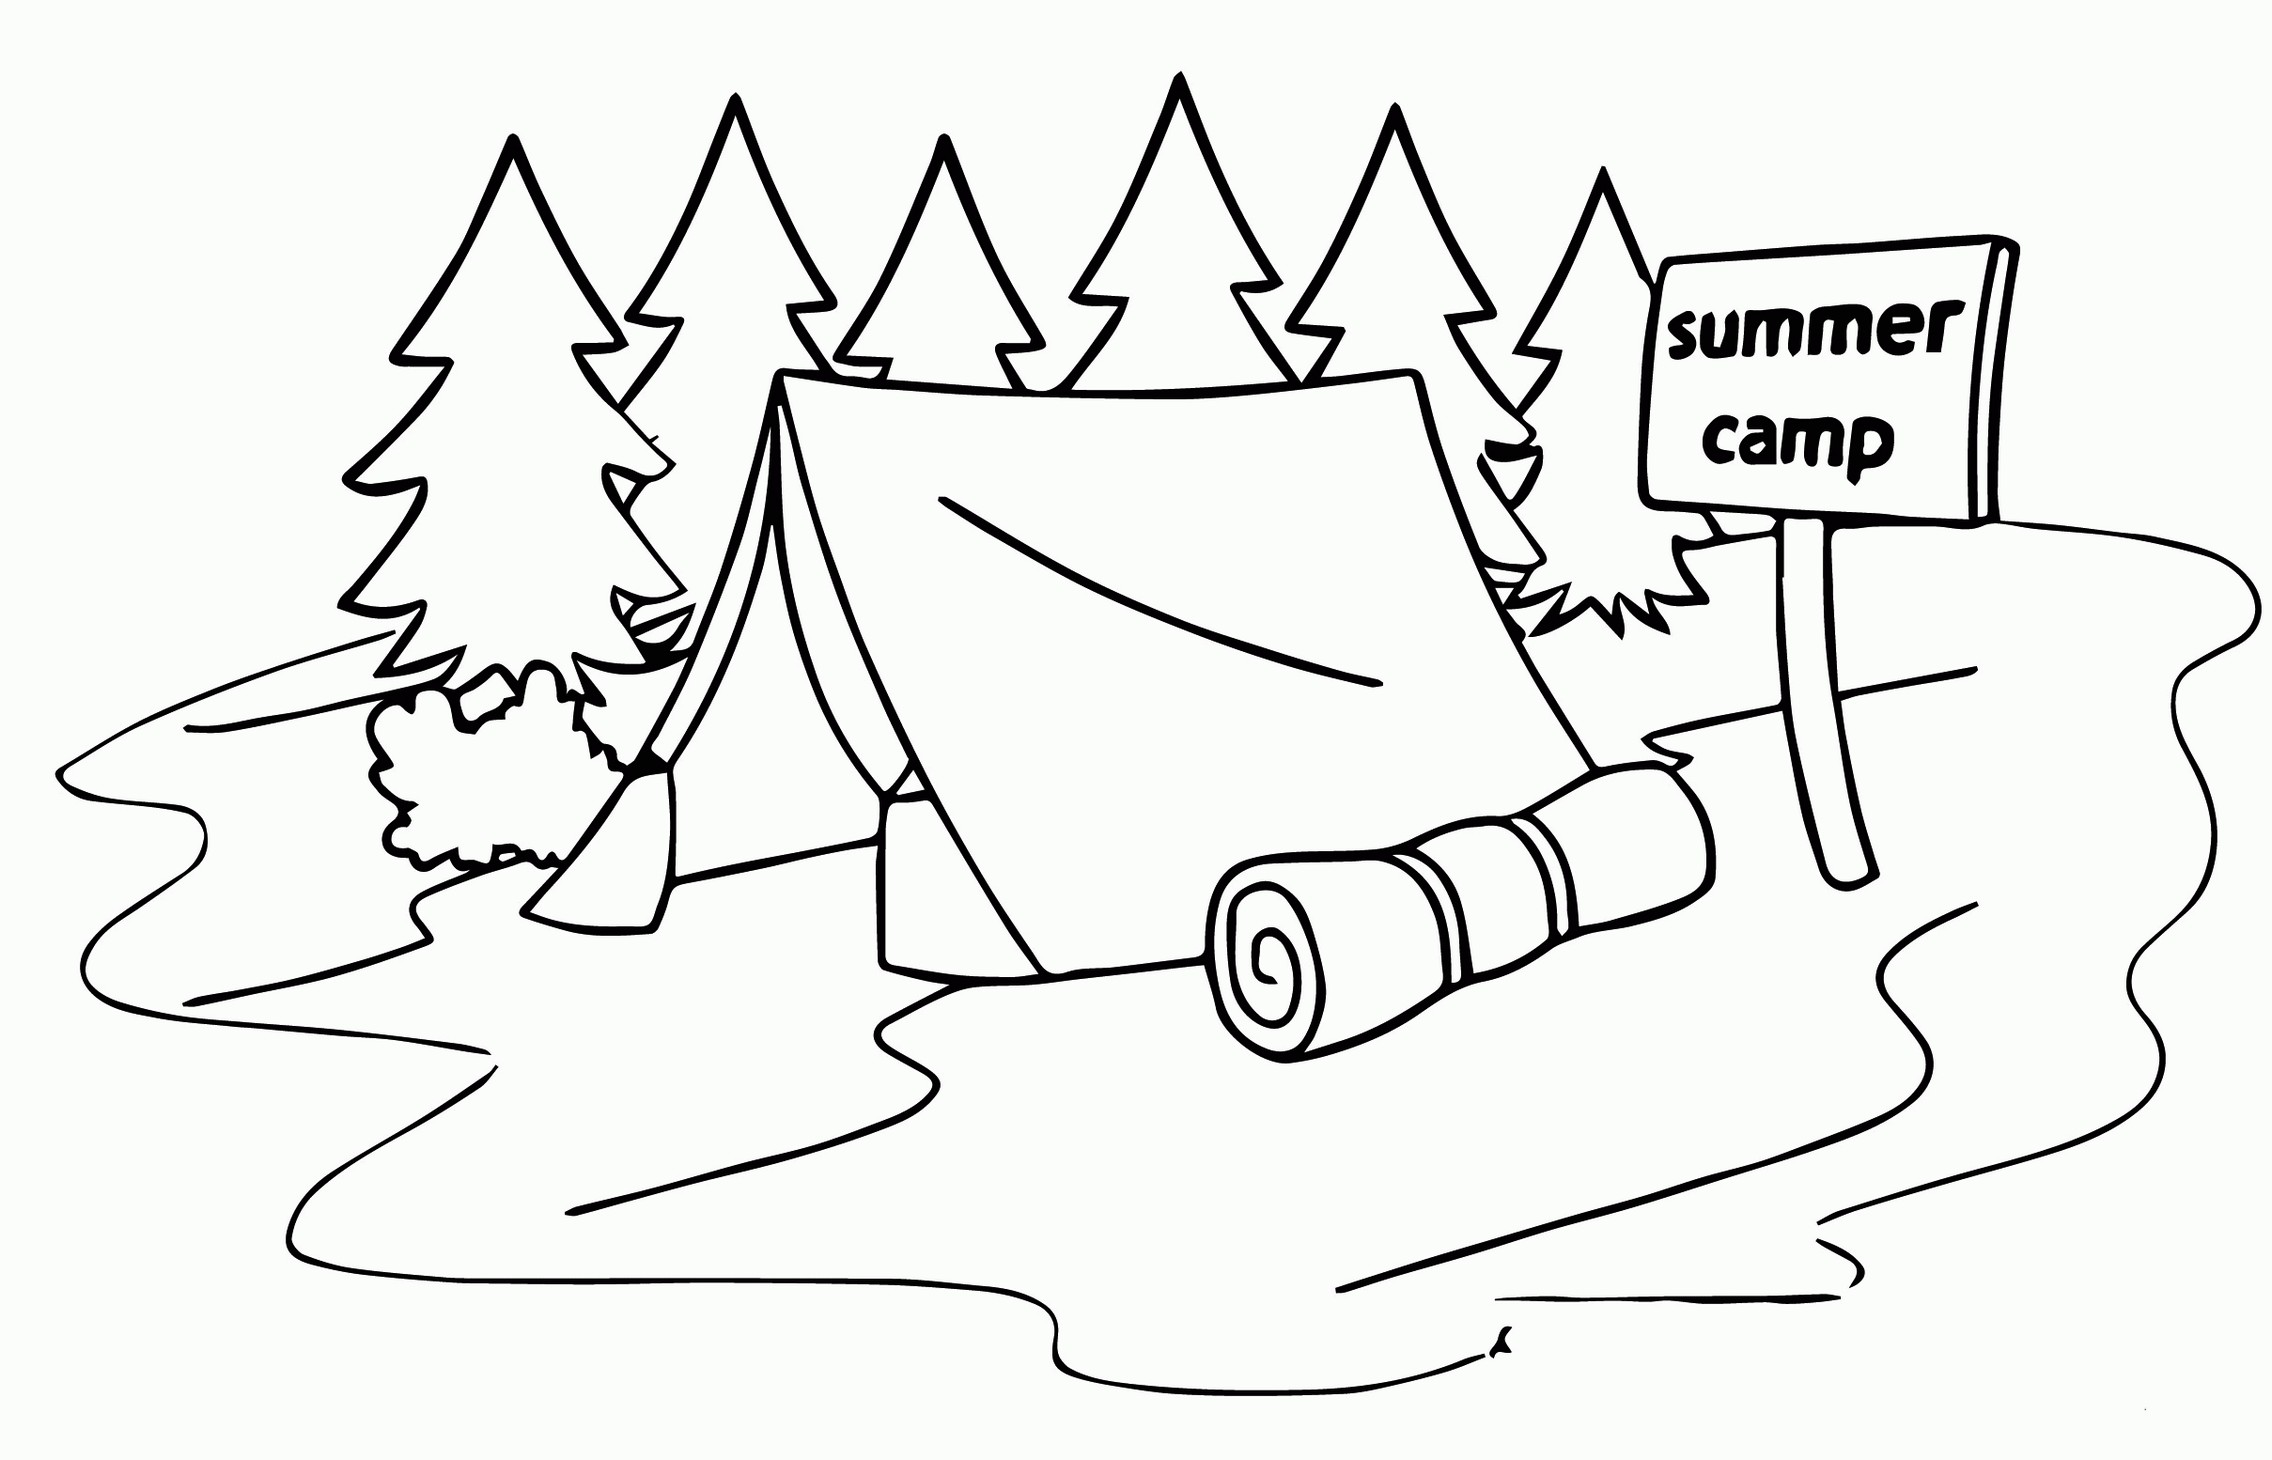 Summer Camp Tent Coloring Page For Kids